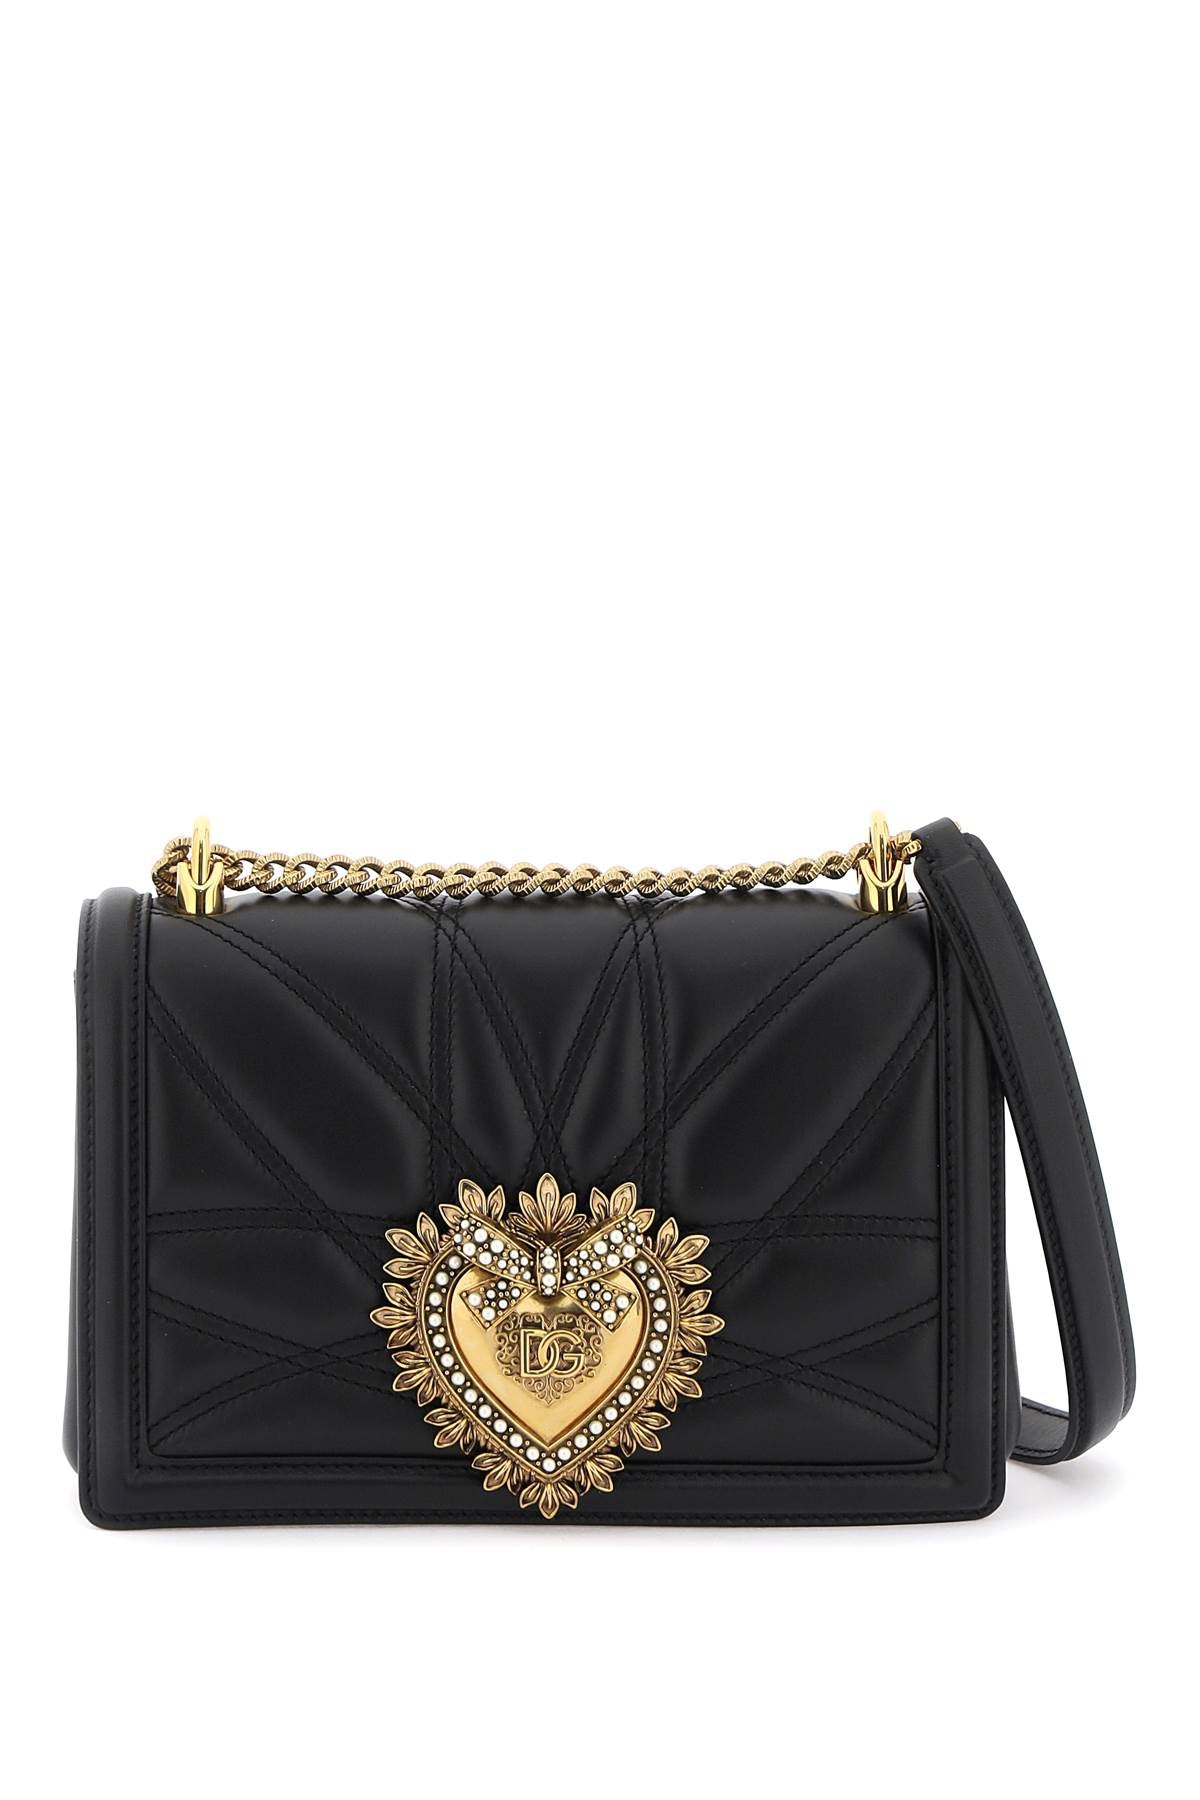 Dolce & gabbana medium devotion bag in quilted nappa leather-0